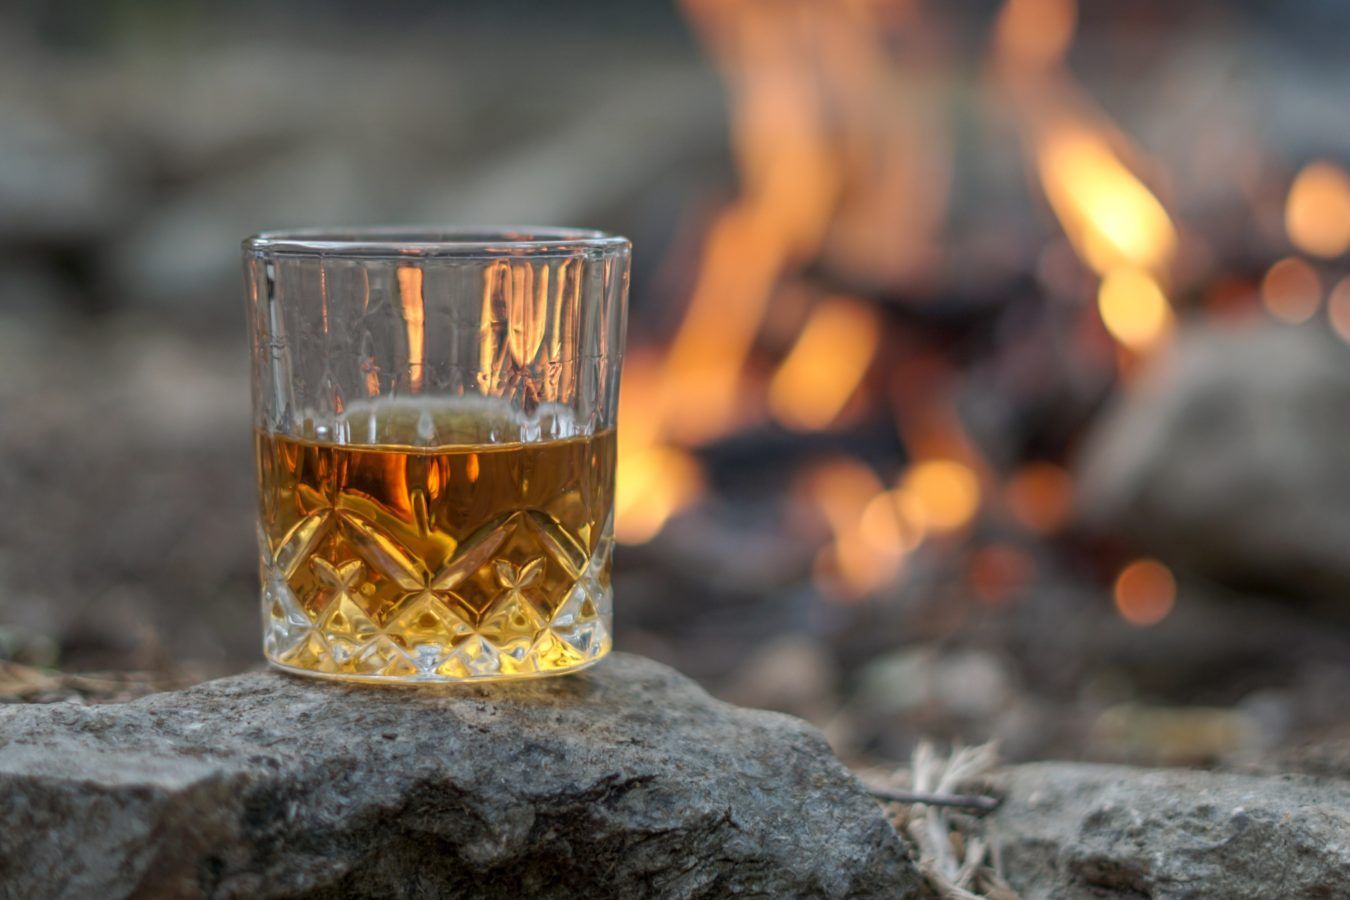 A beginner’s guide to the differences between whiskey, rye, and bourbon